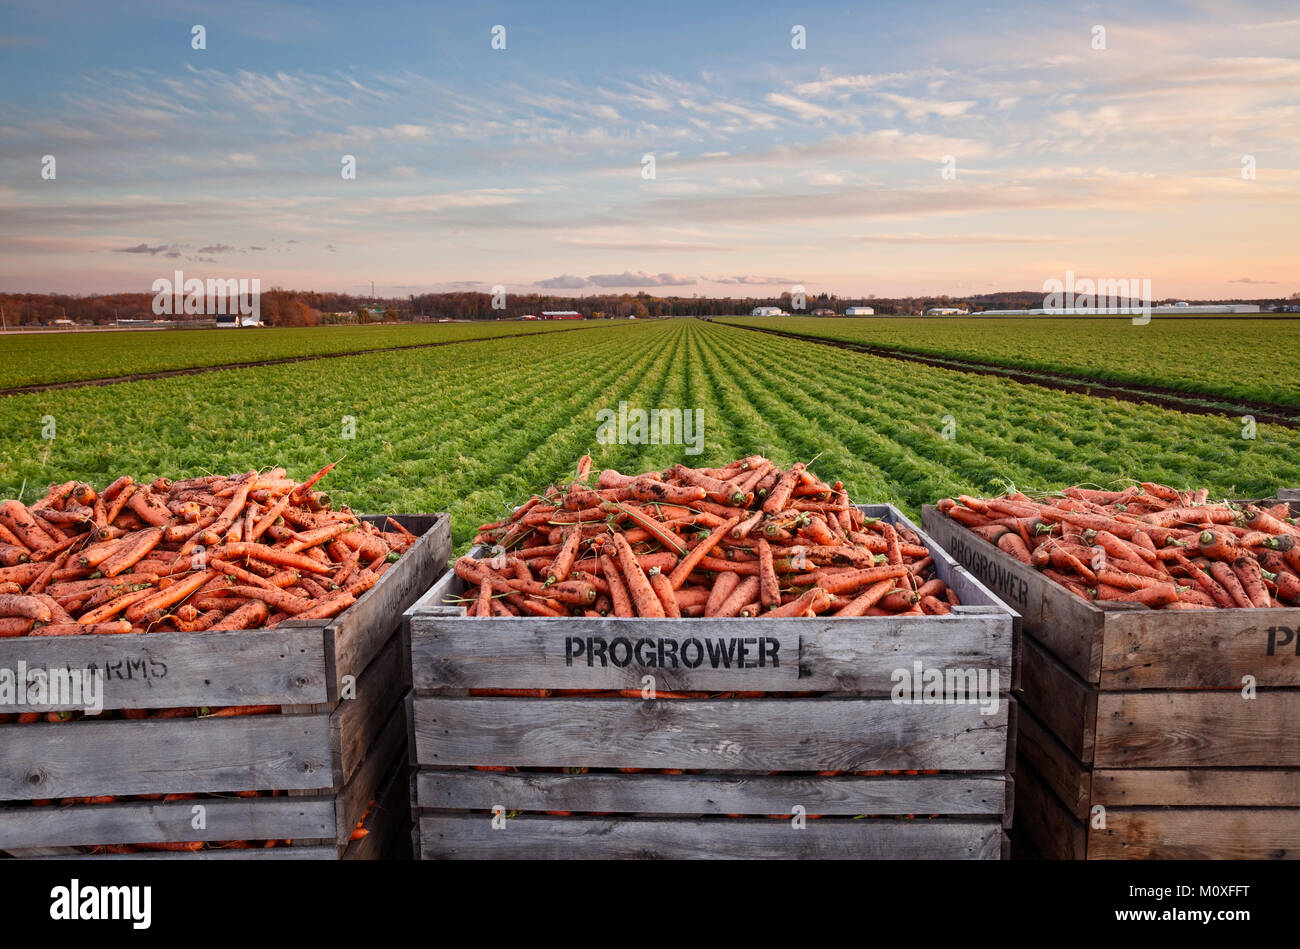 Crates of carrots with a mature field of carrots in the background.  Holland marsh in Bradford West Gwillimbury, Ontario, Canada. Stock Photo